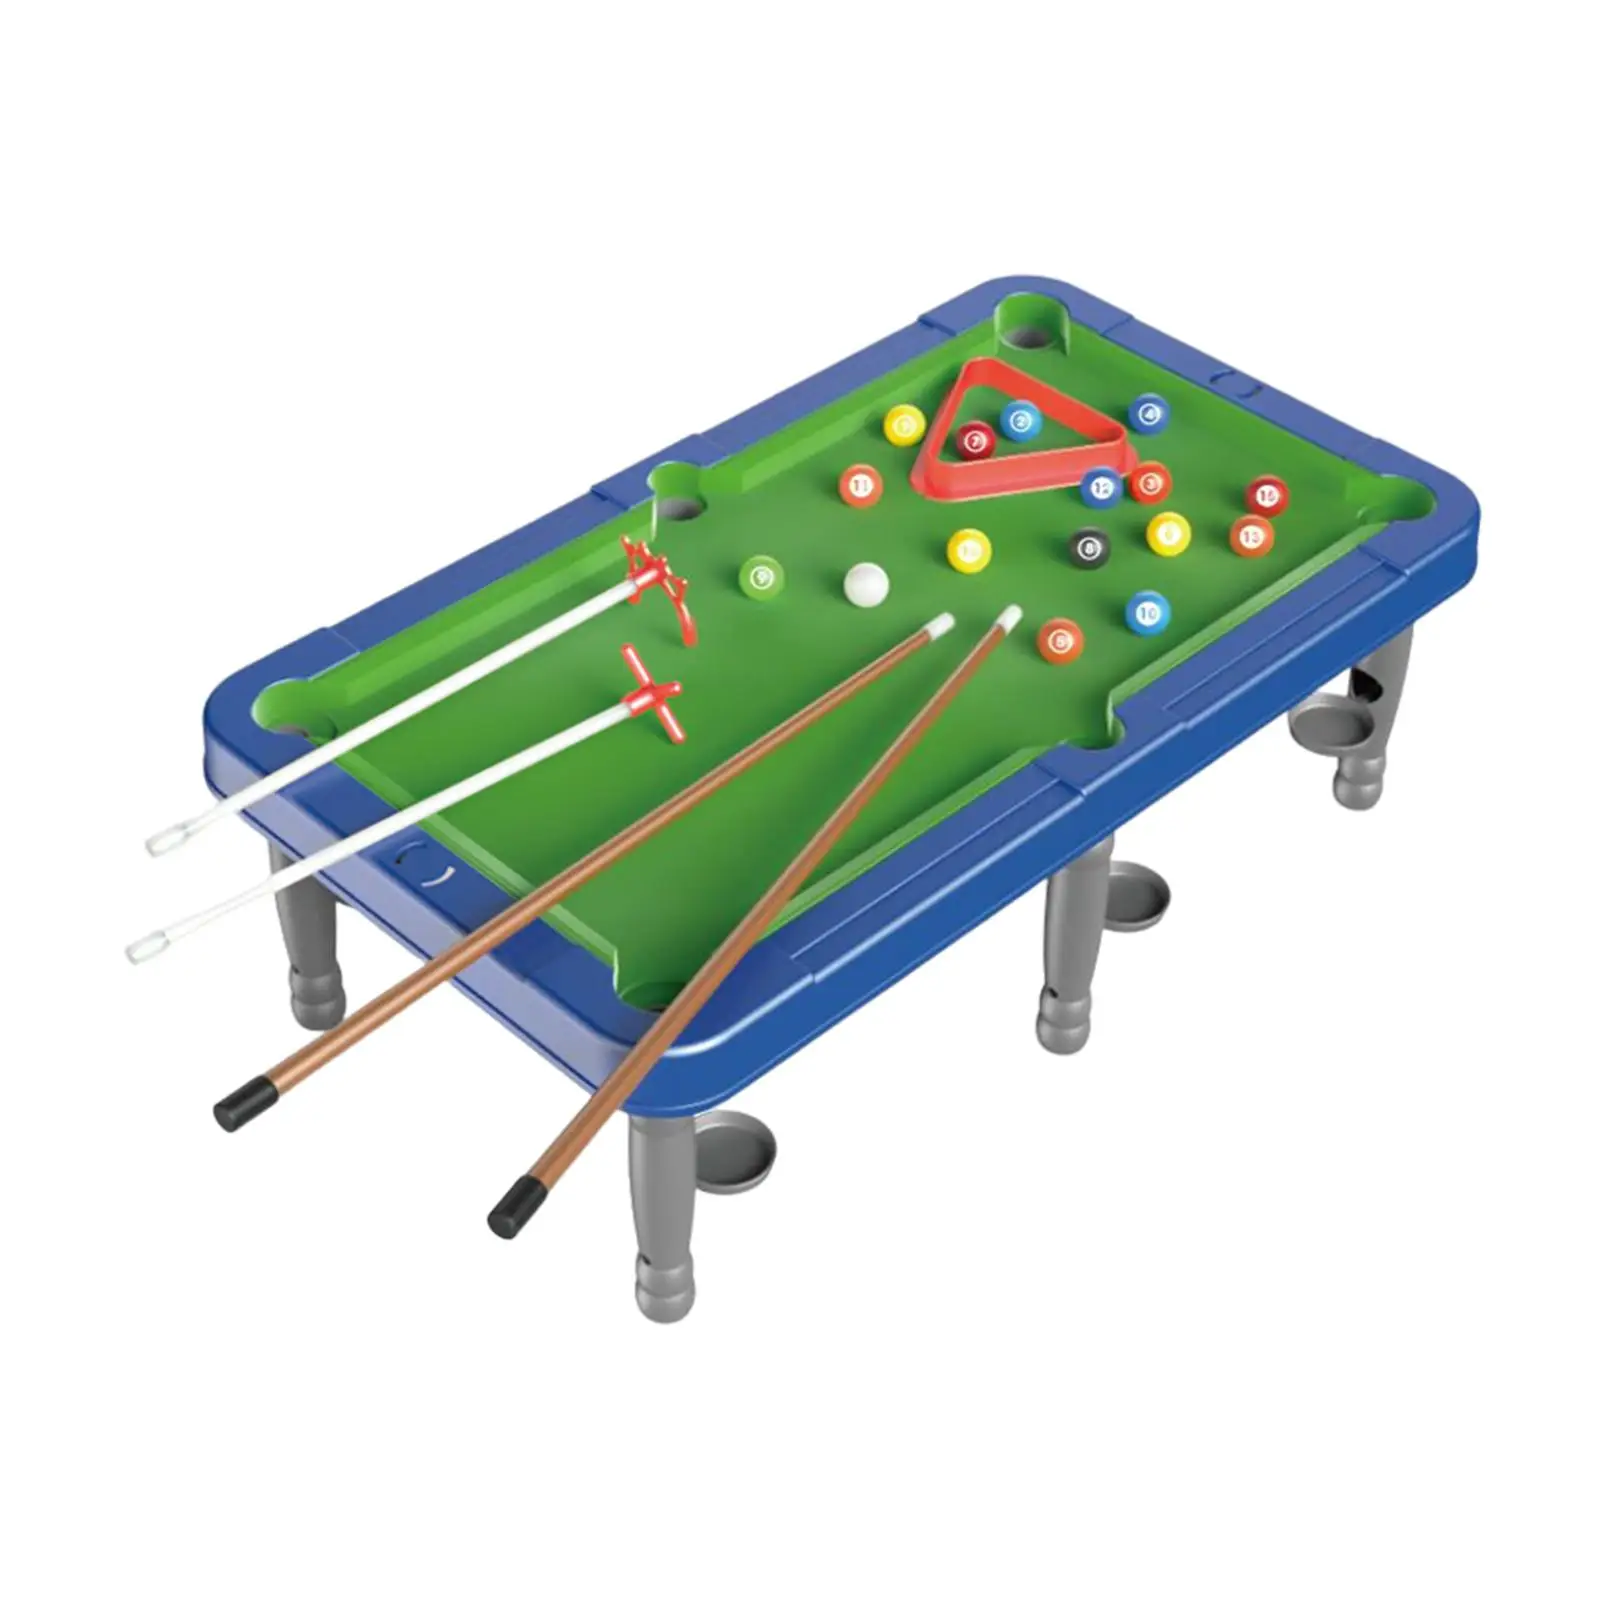 Portable Pool Table Set Home Office Use Tabletop Billiards for Children Kids